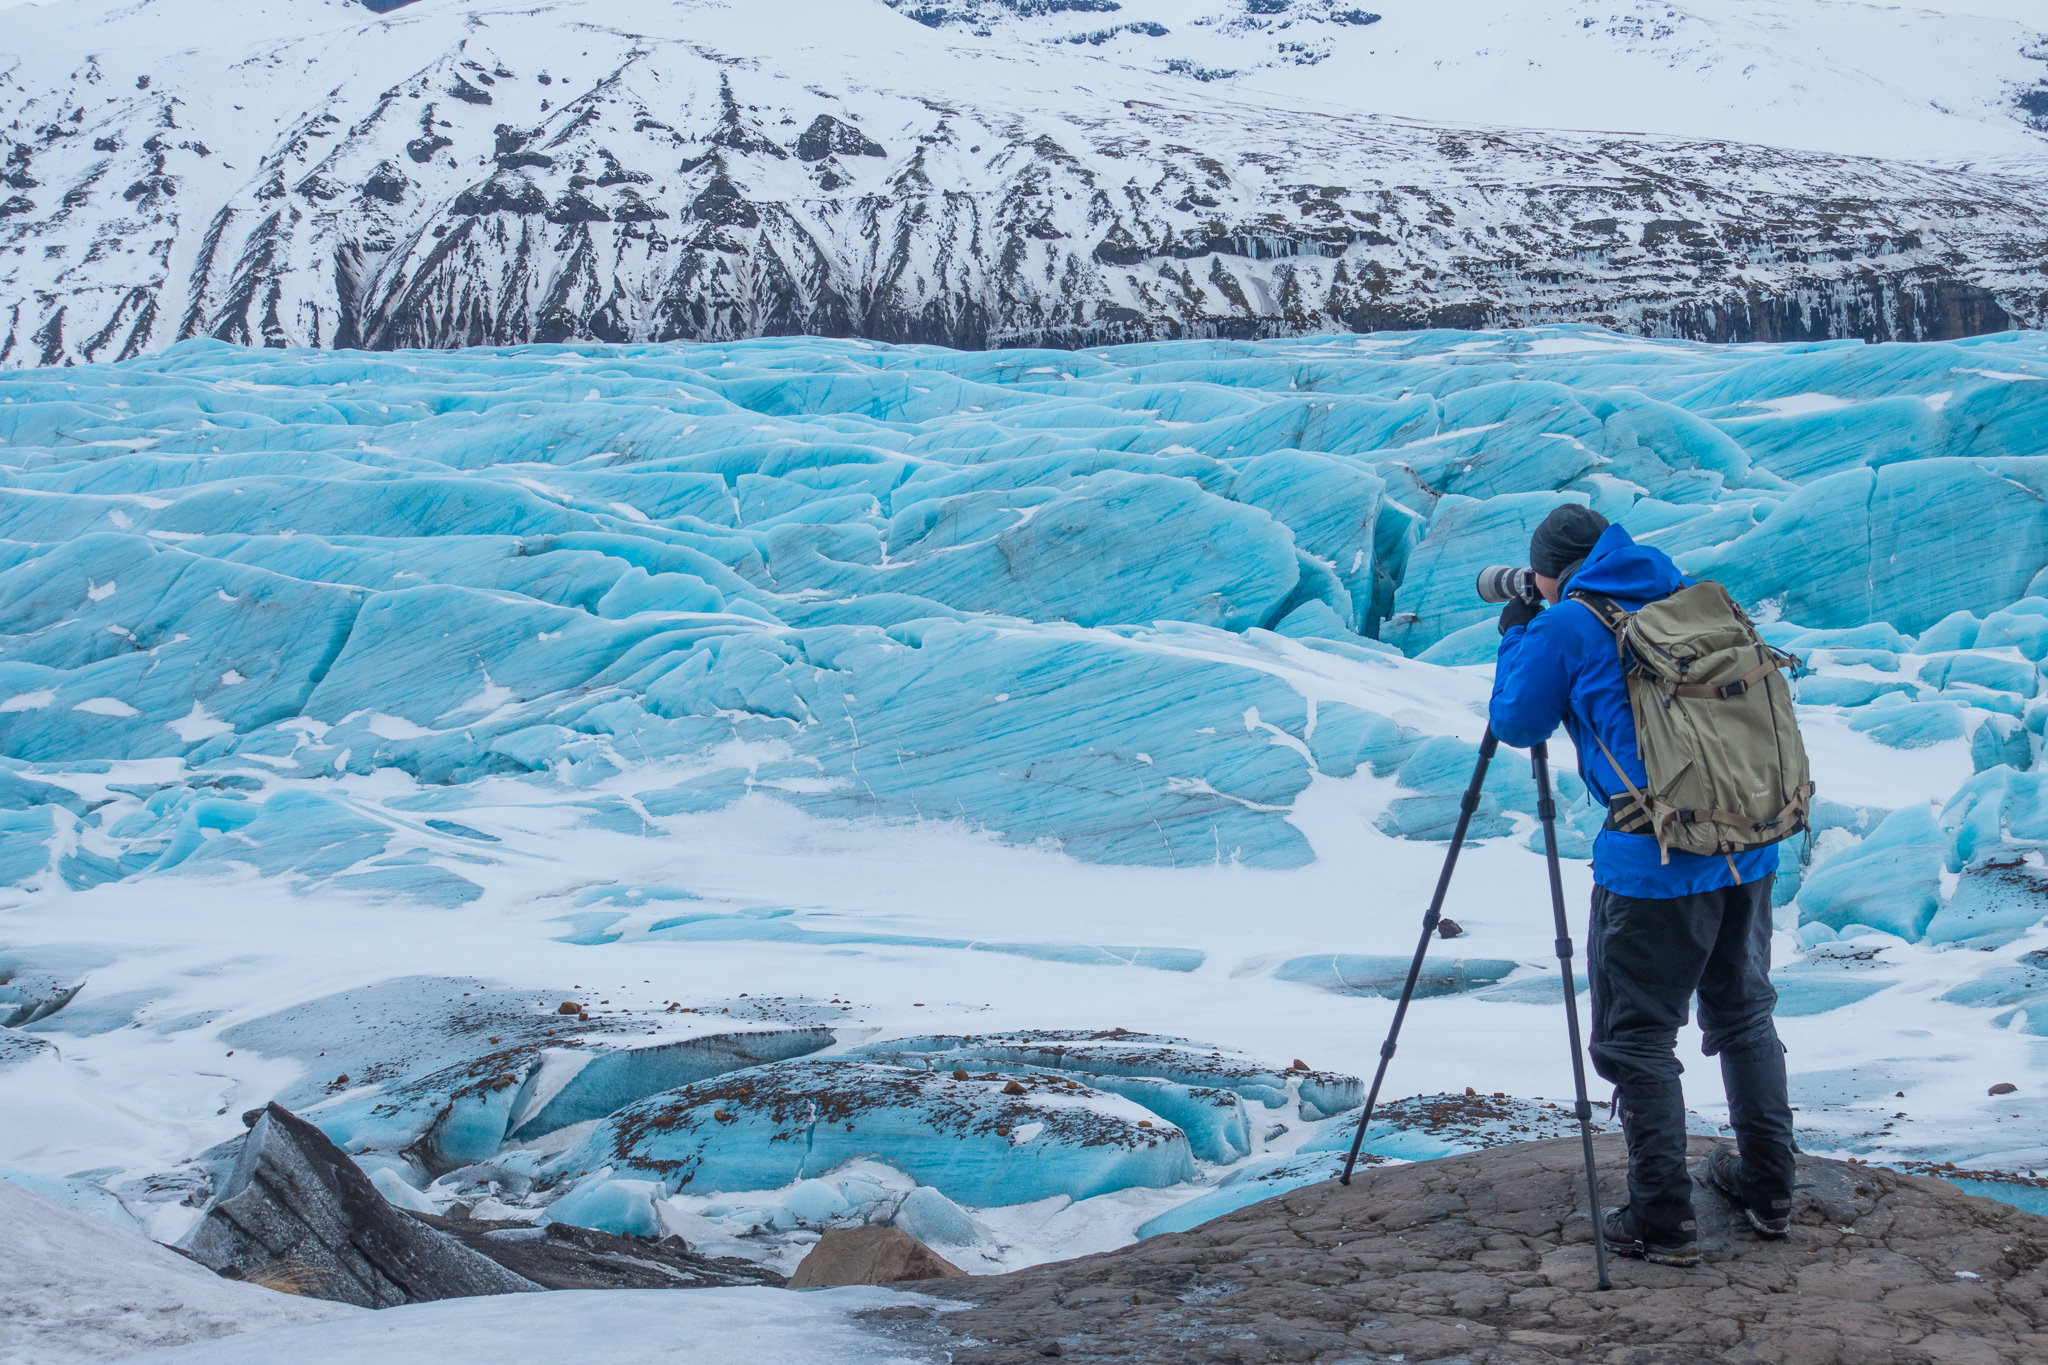 Photographing glaciers in the South of Iceland this past winter